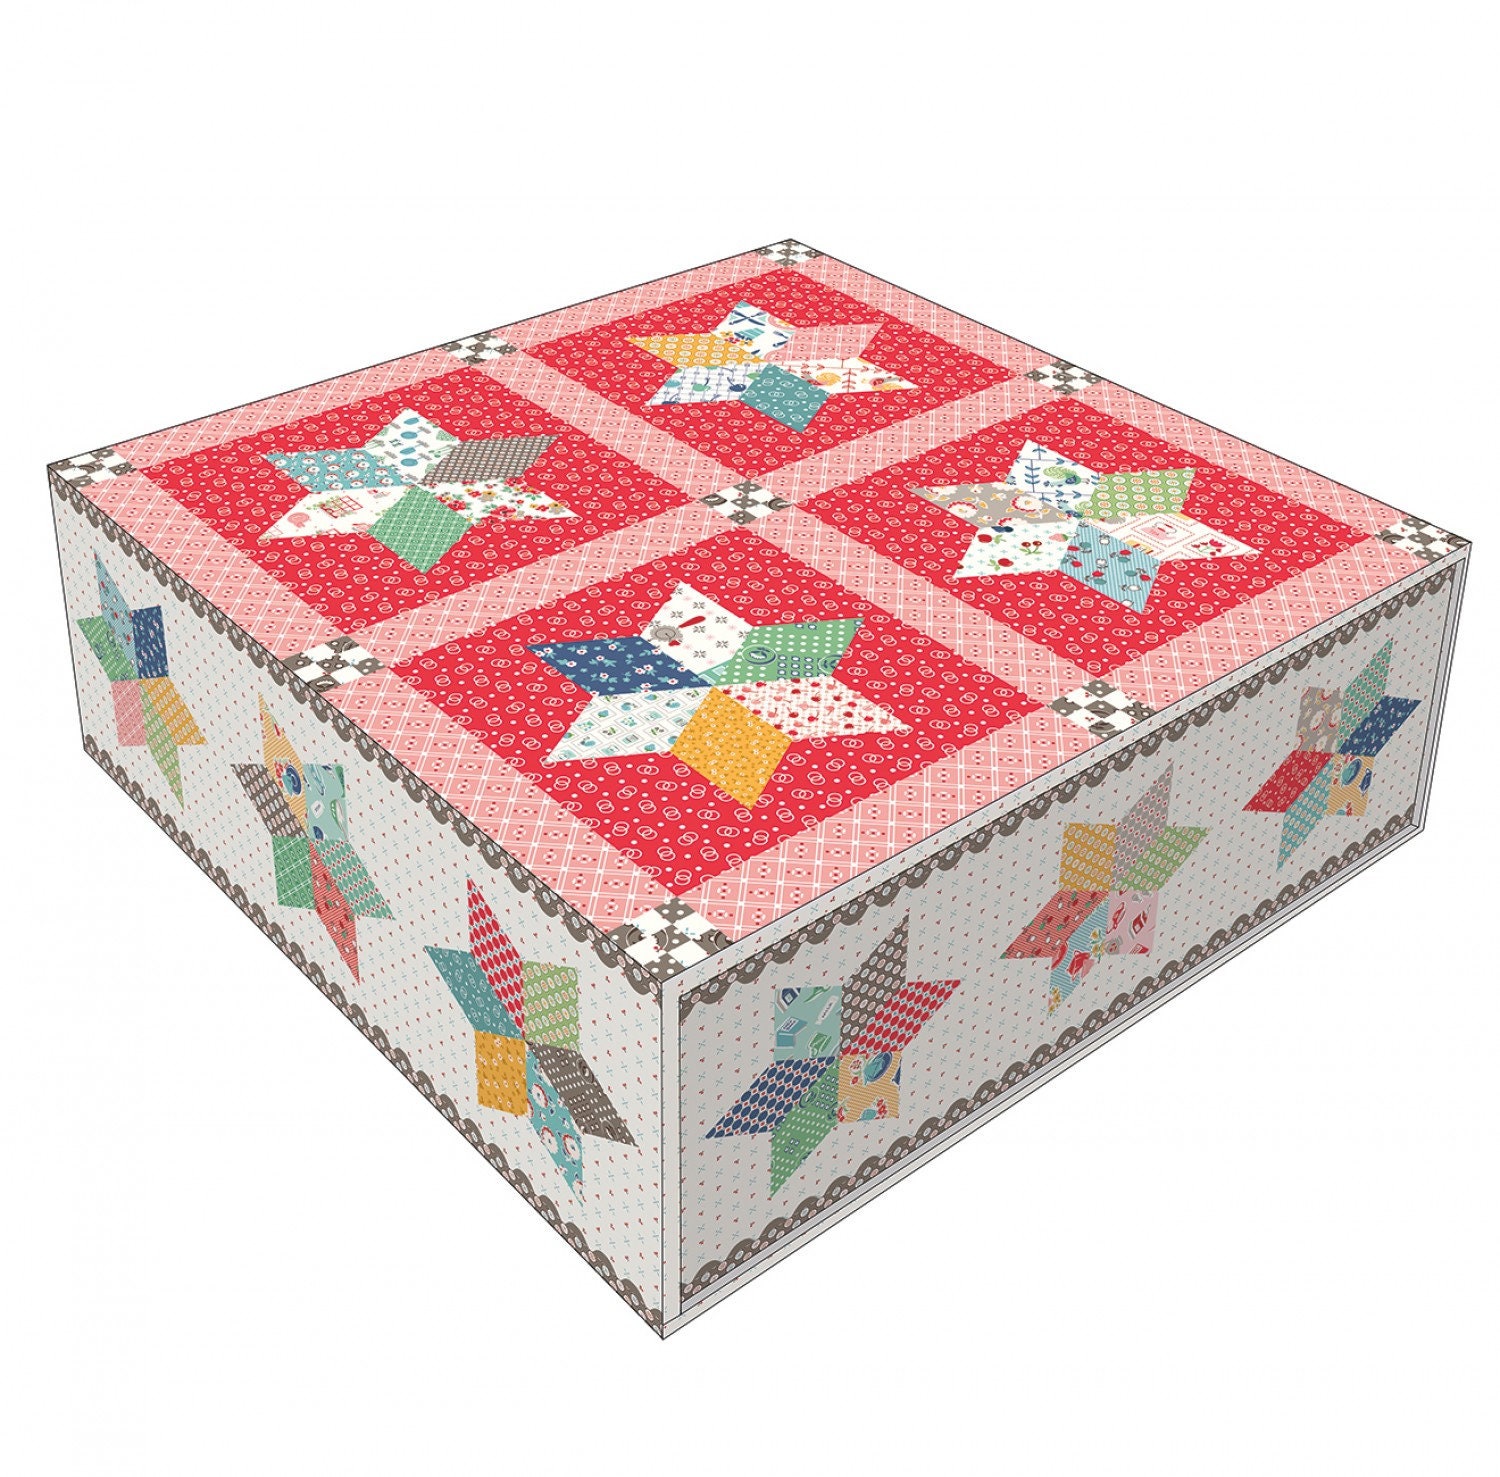 Riley Blake - Cook Book Pot Luck Stars Quilt Kit by Lori Holt 889333245742  - Quilt in a Day Fabric Kits